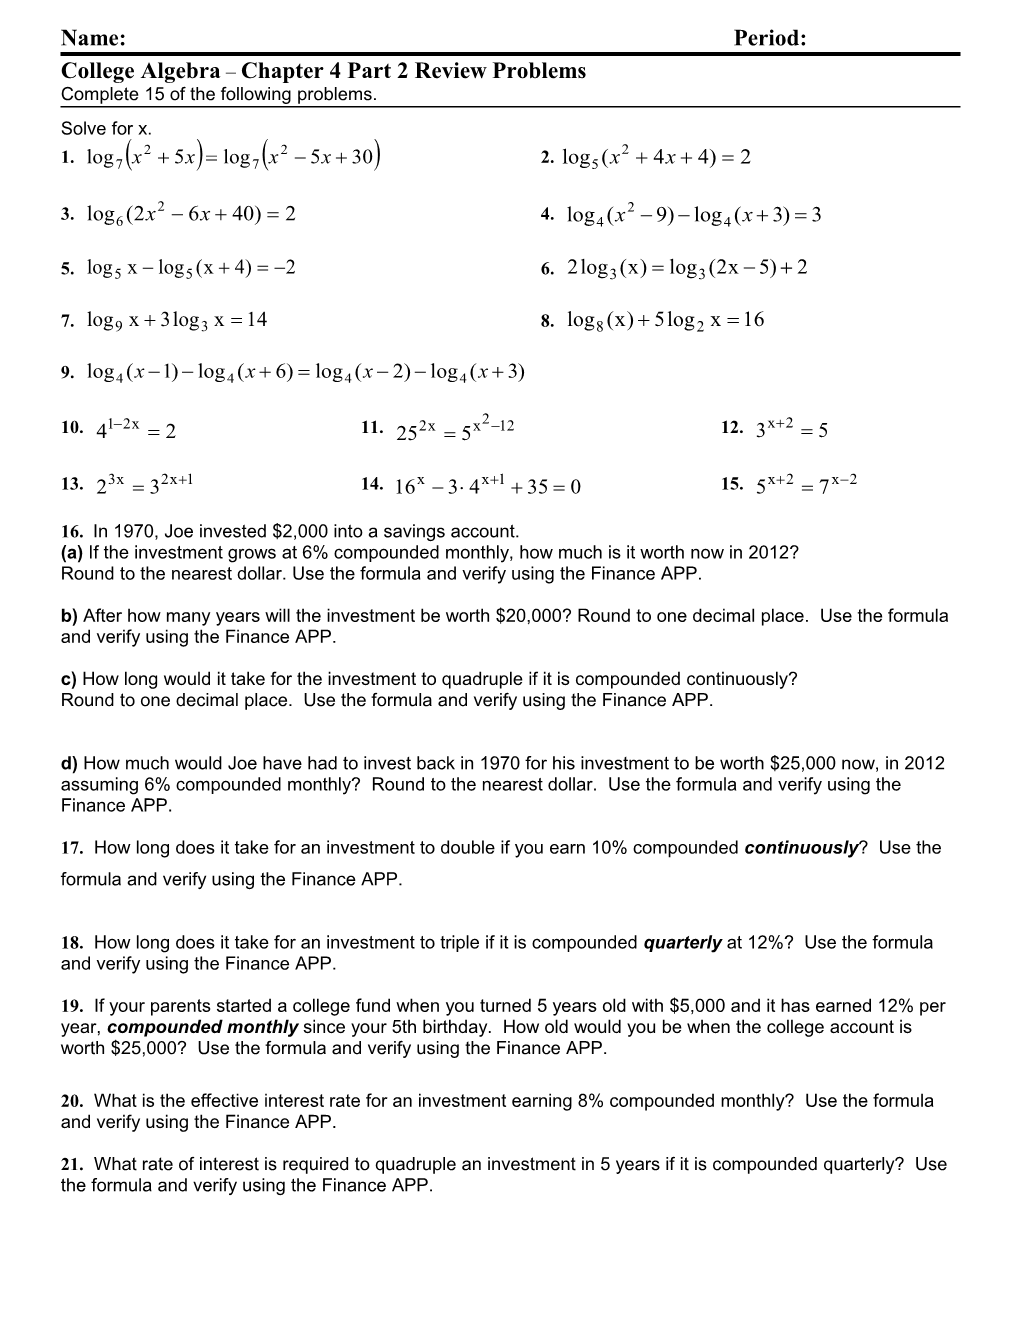 College Algebra Chapter 4 Part 2 Reviewproblems